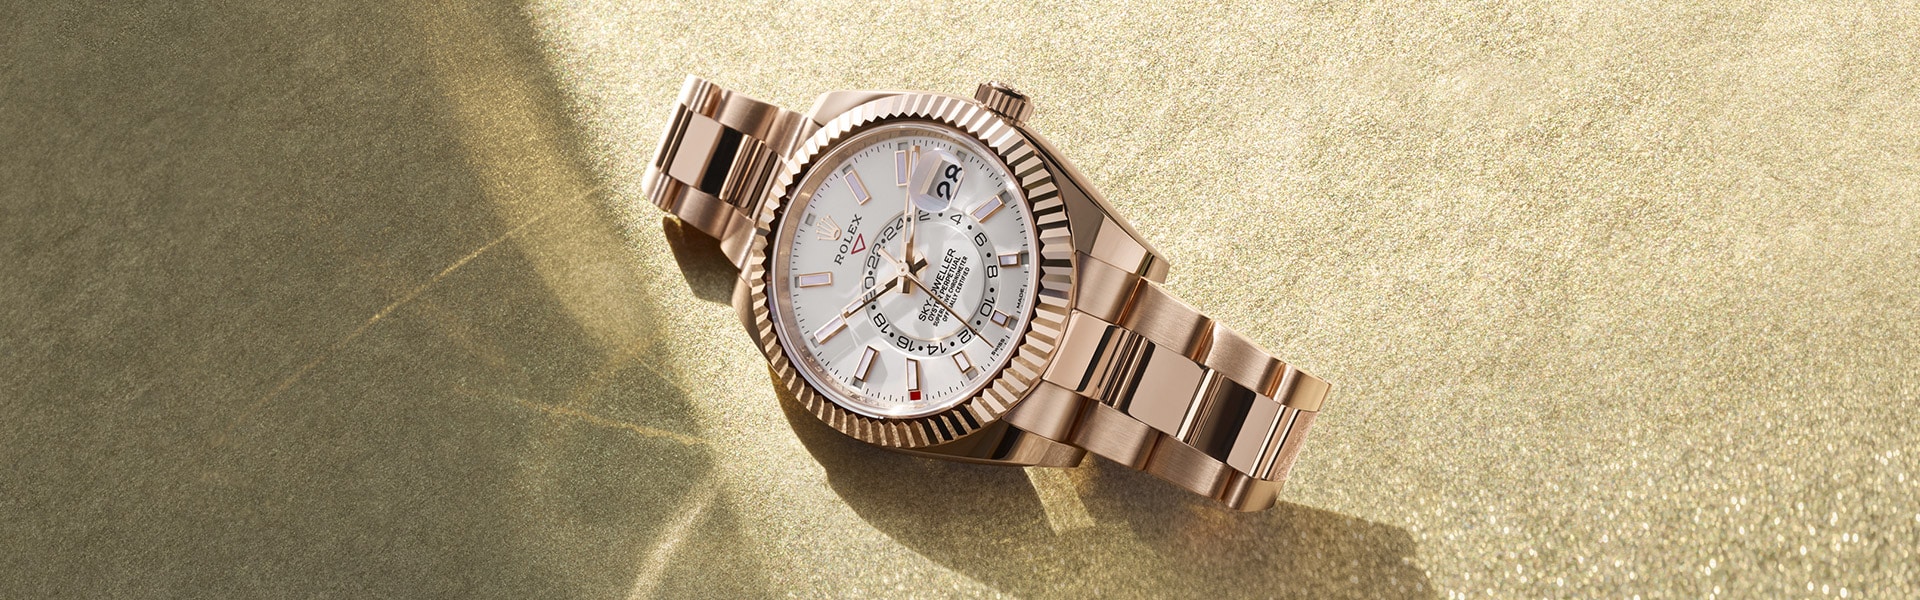 Datejust - Rolex Festive Selection at Lucido Fine Jewelry